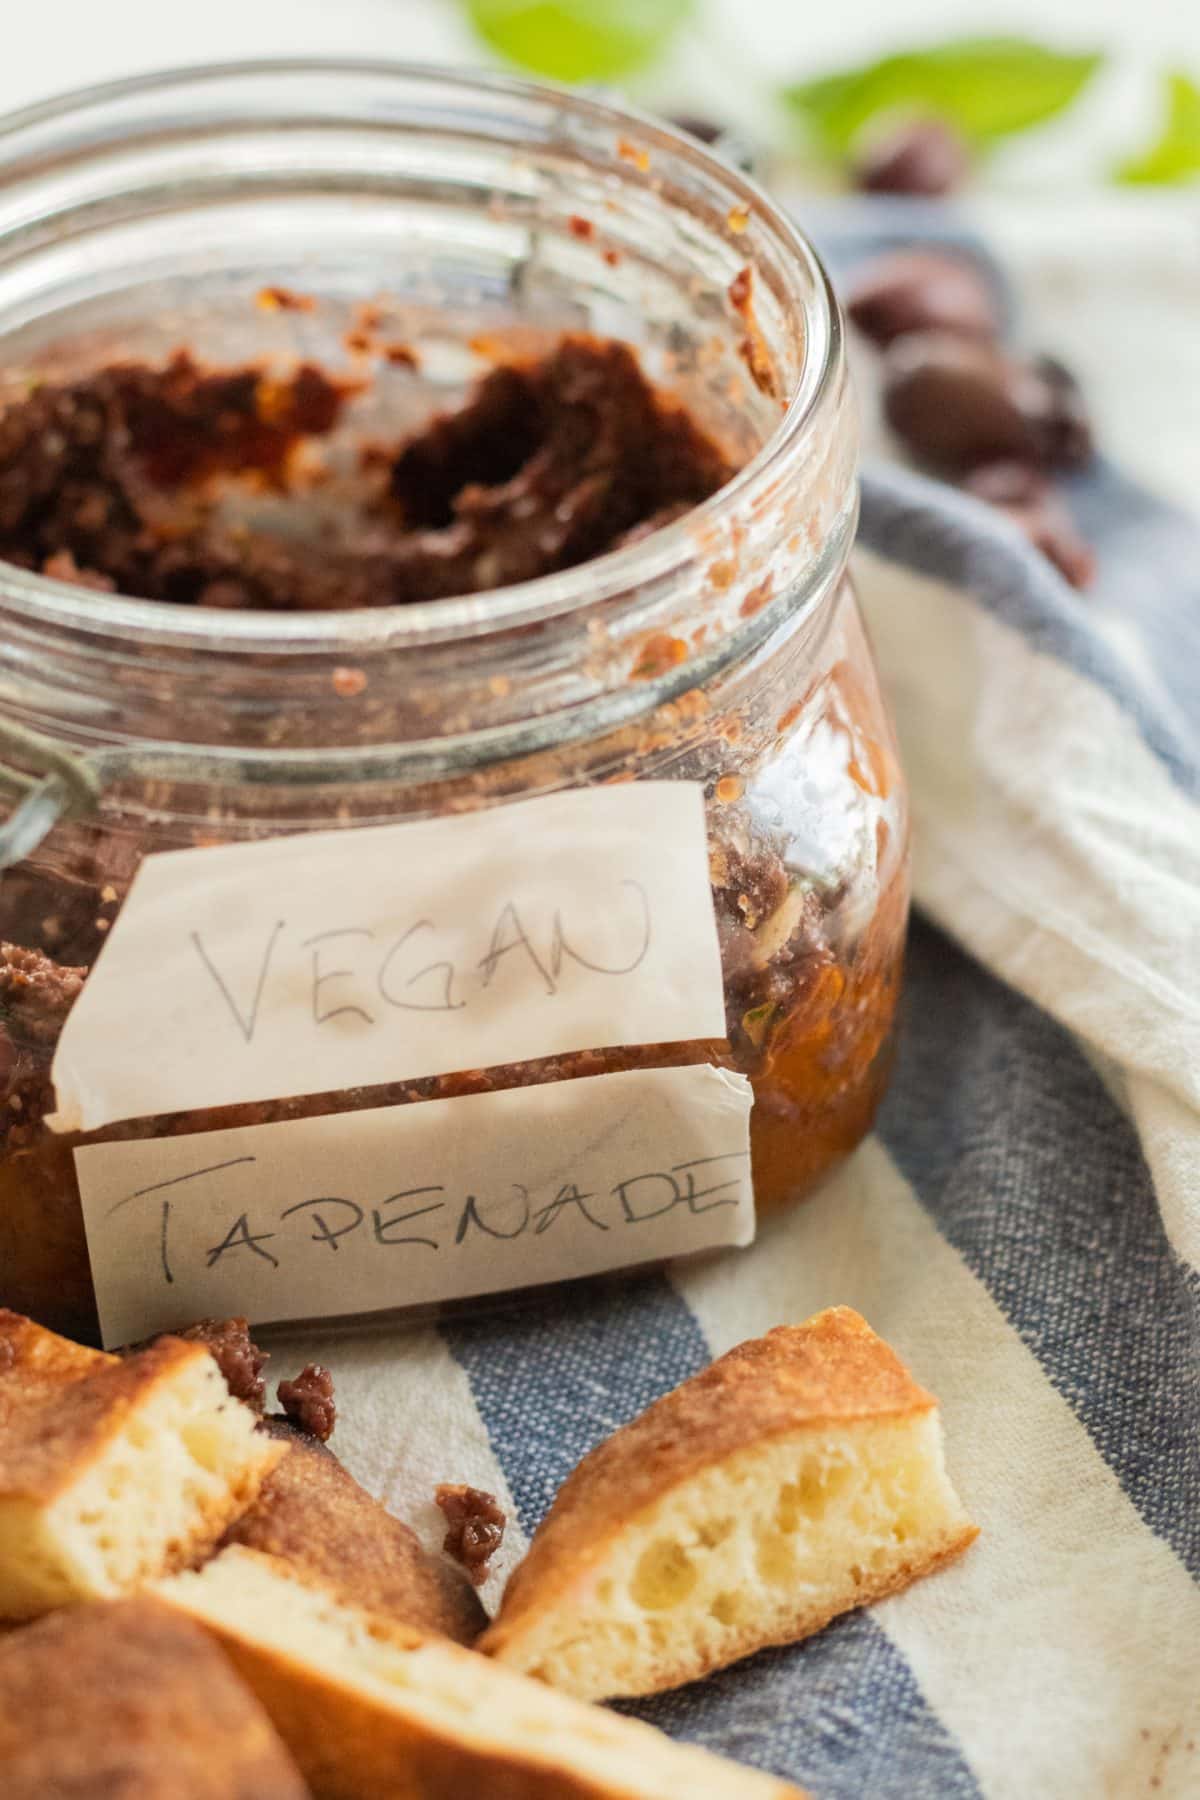 sideview of a jar with tapenade with tapenade with vegan tapenade written on the jar